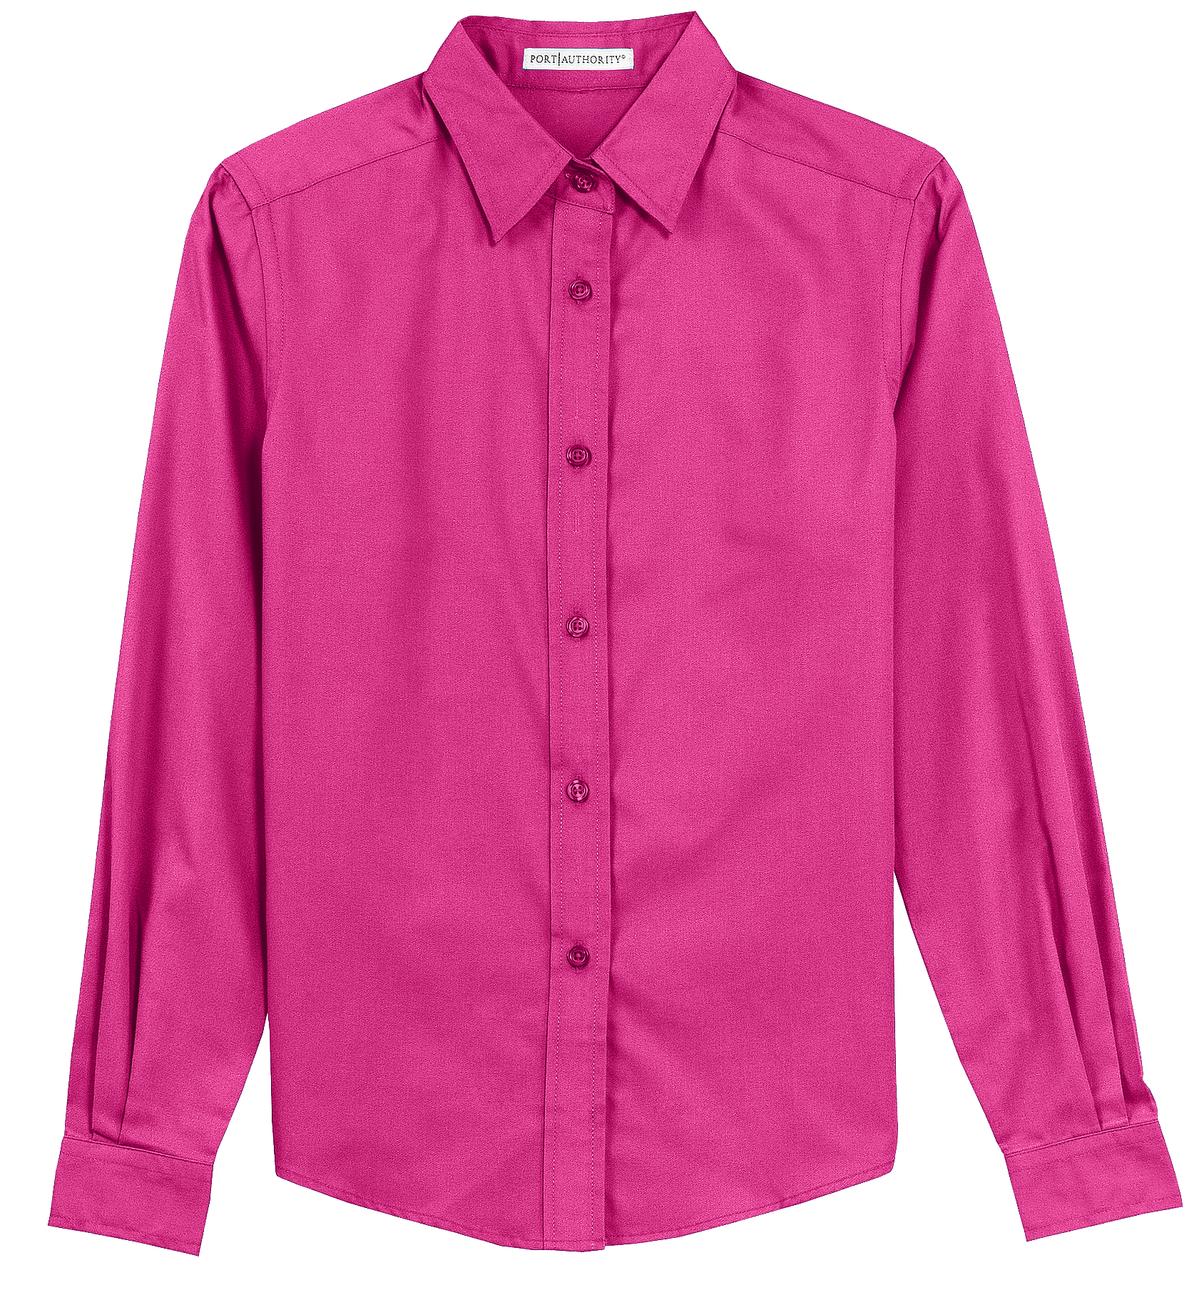 Port Authority Ladies Long Sleeve Easy Care Shirt-4XL (Tropical Pink) - image 5 of 6